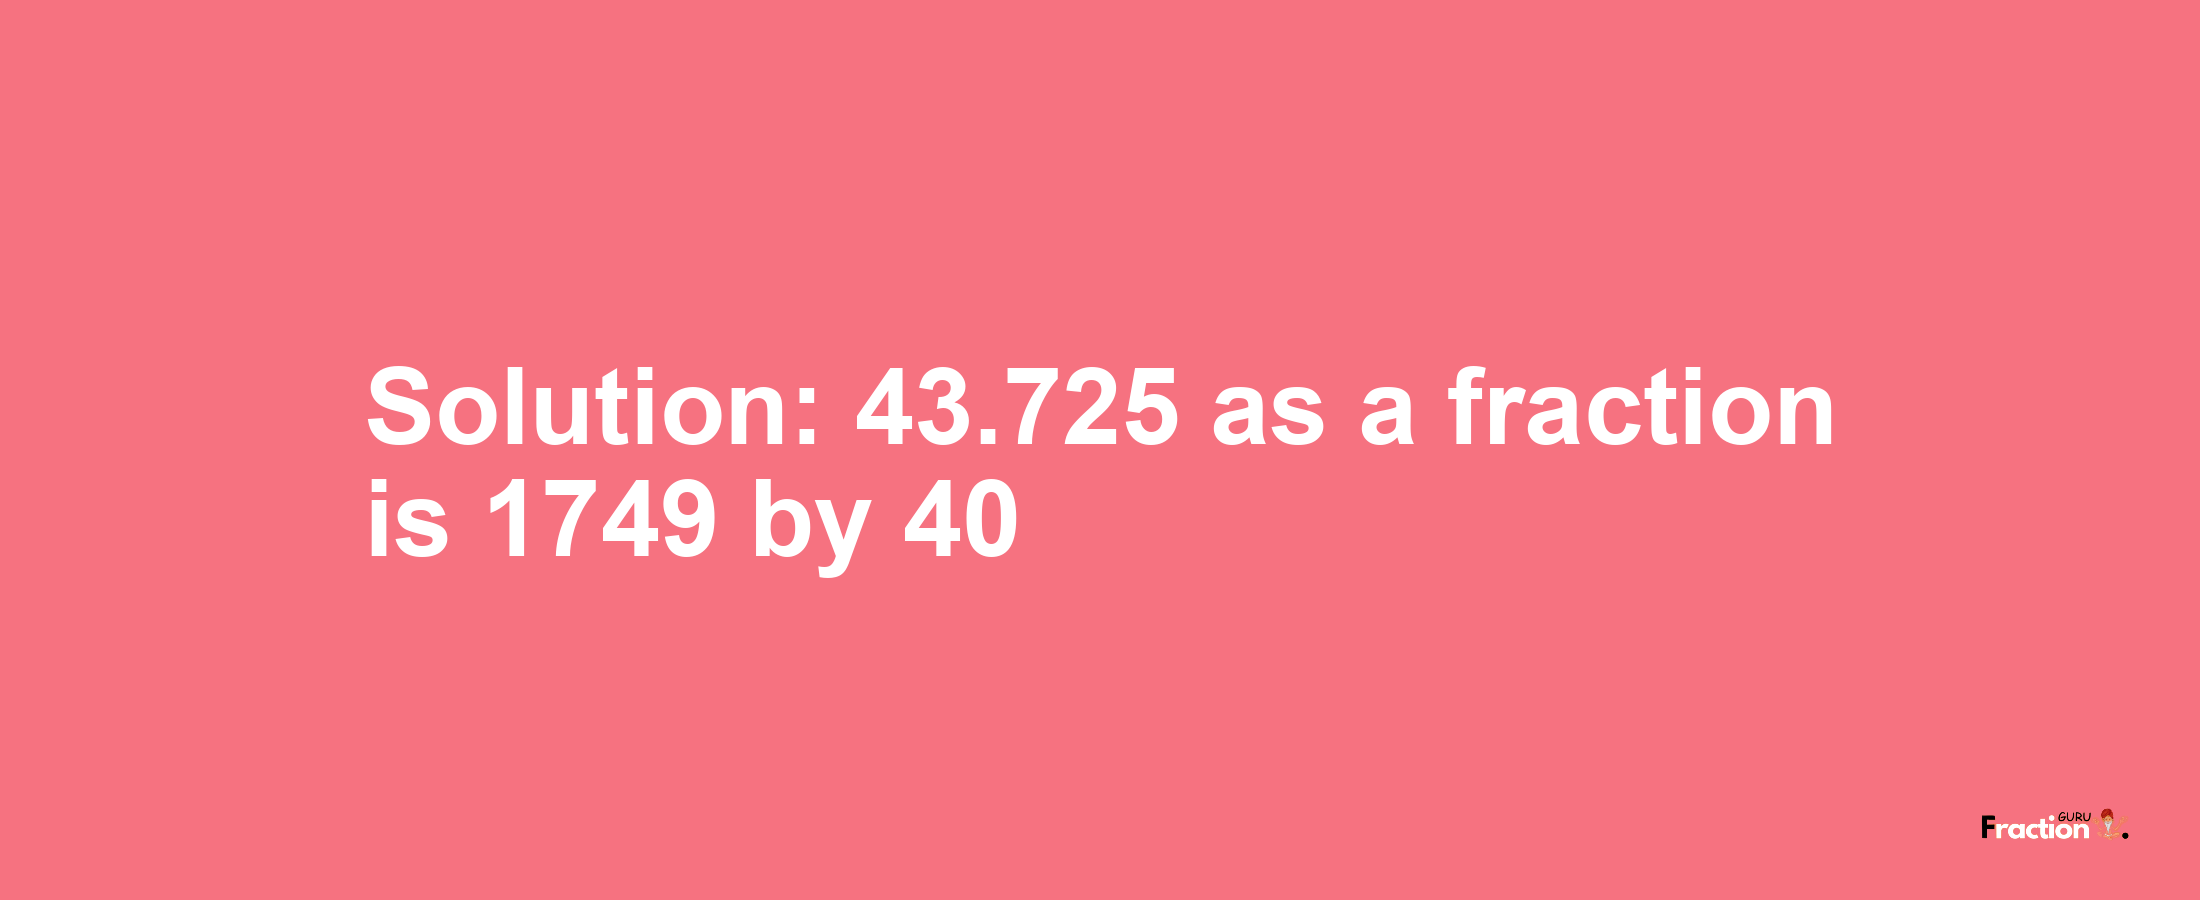 Solution:43.725 as a fraction is 1749/40